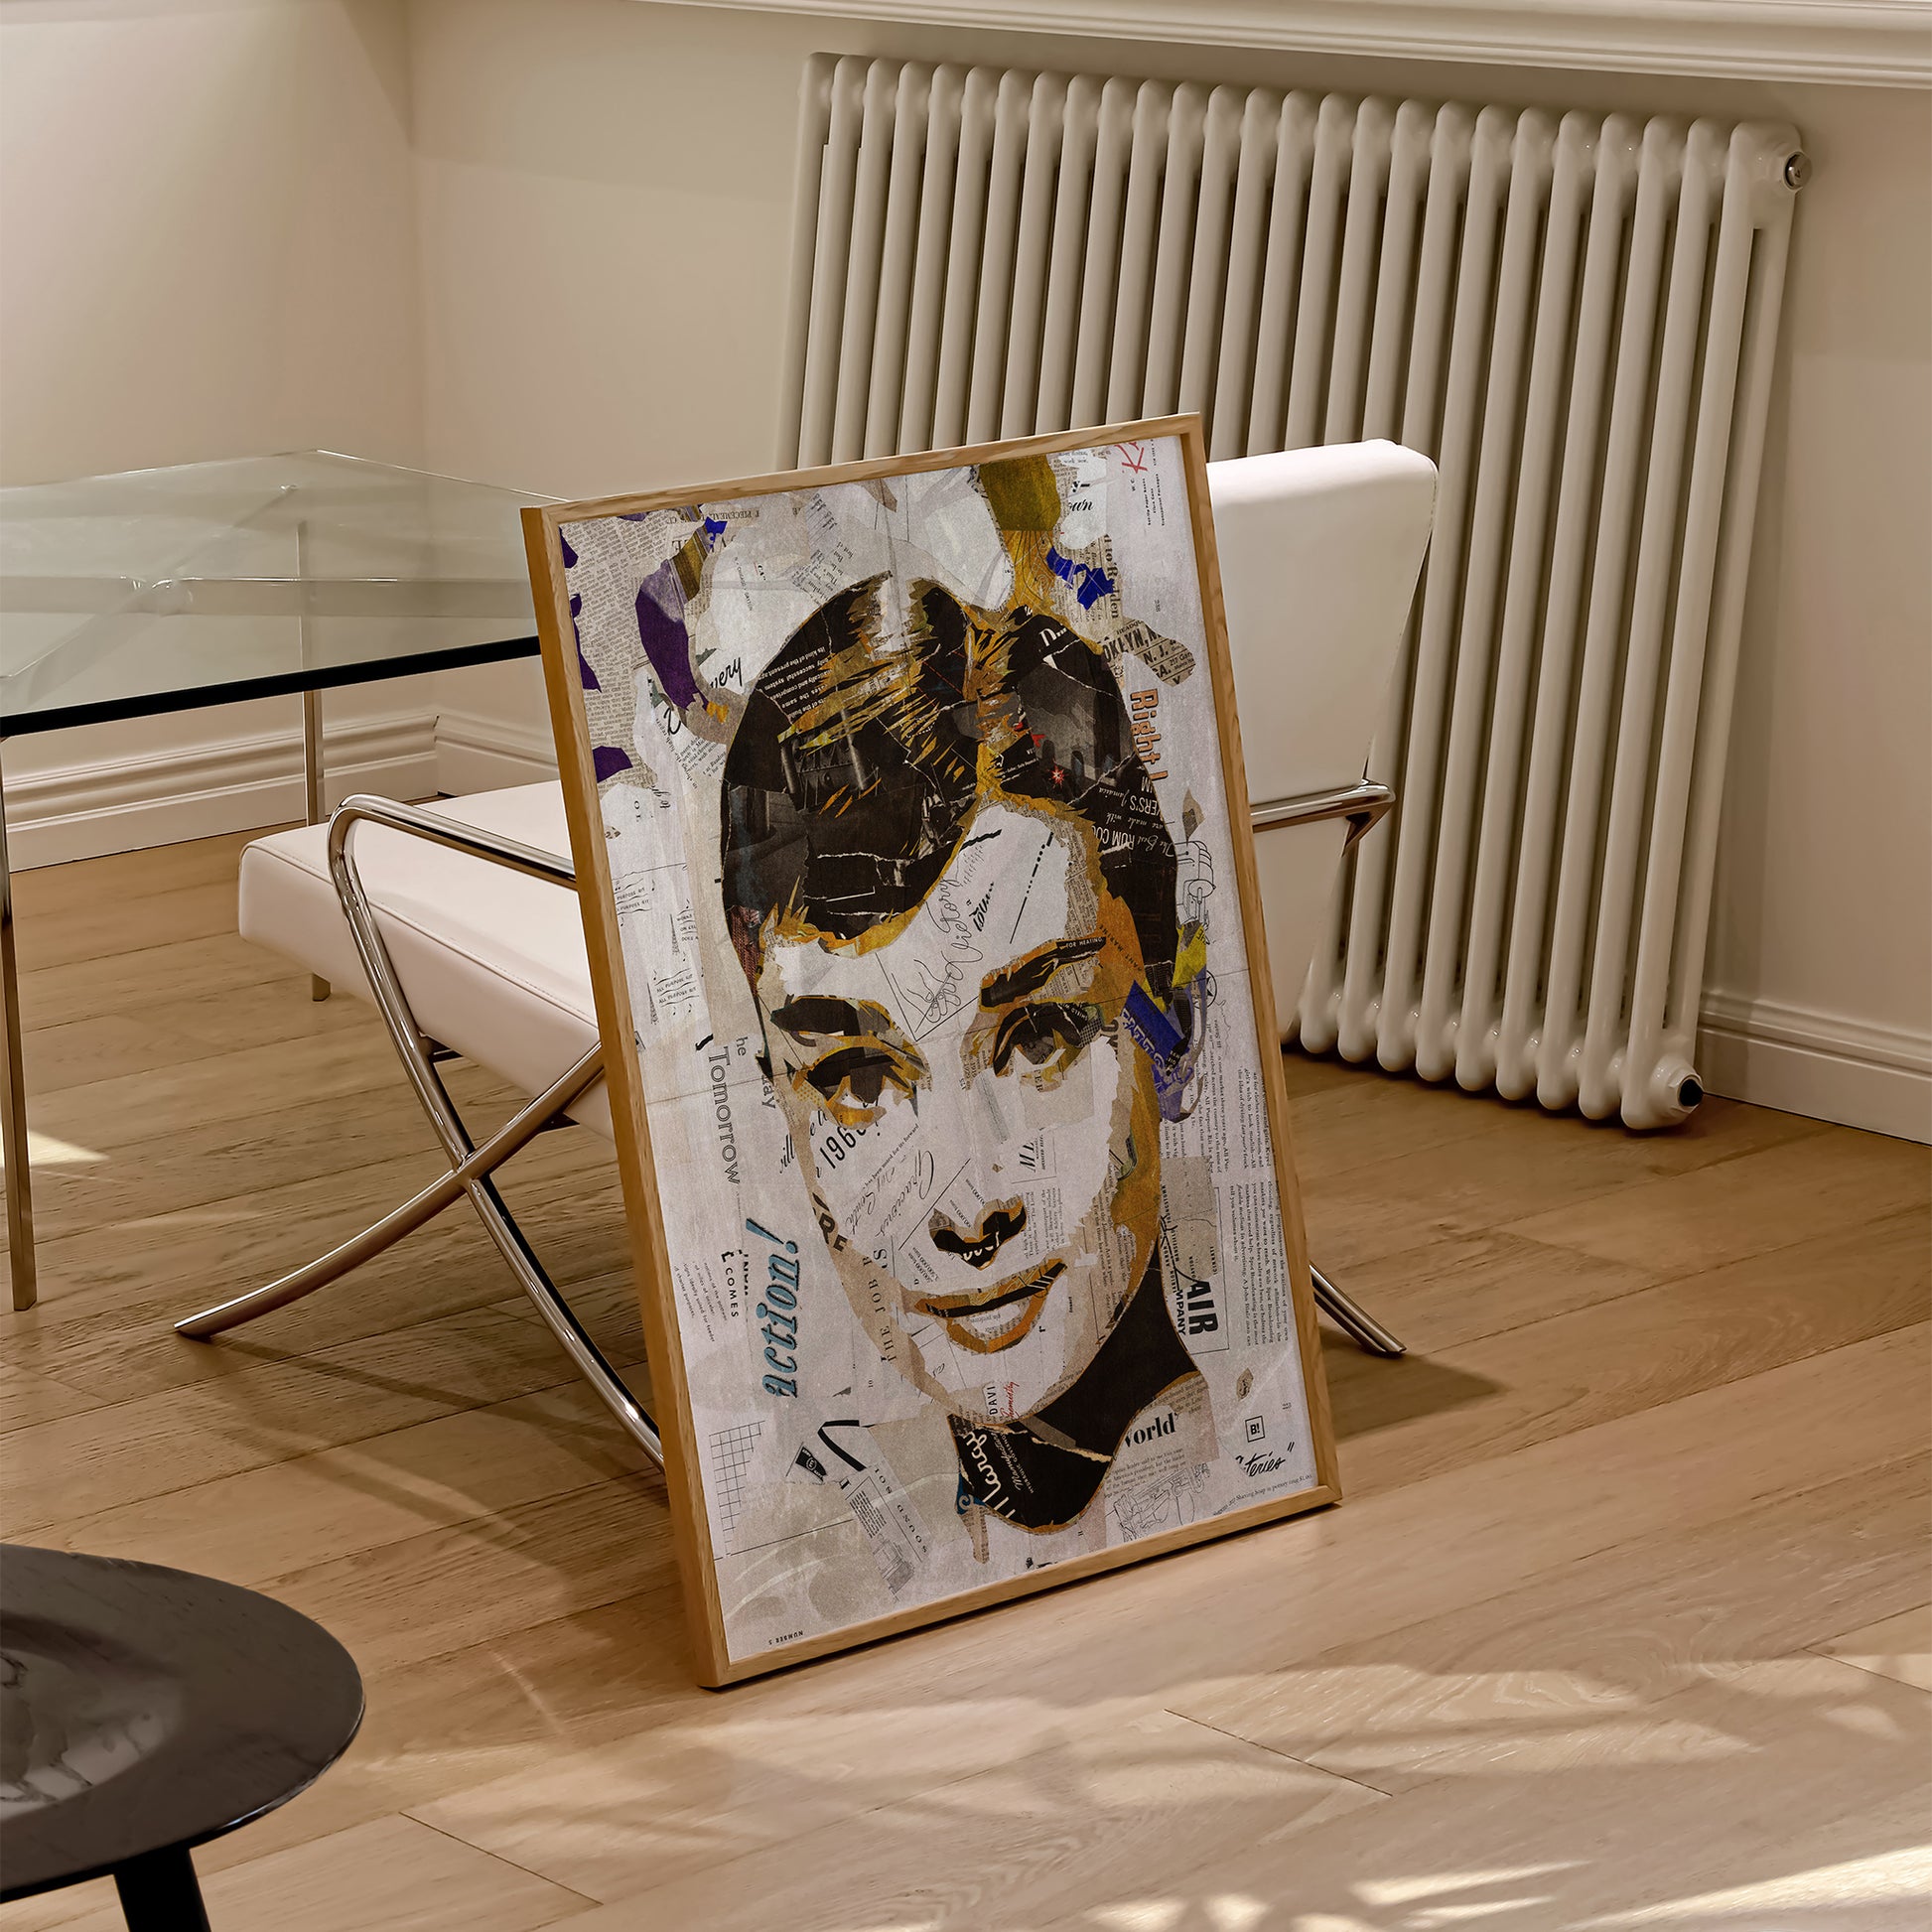 Be inspired by our iconic collage portrait art print of Audrey Hepburn. This artwork was printed using the giclée process on archival acid-free paper and is presented in a natural oak frame, capturing its timeless beauty in every detail.